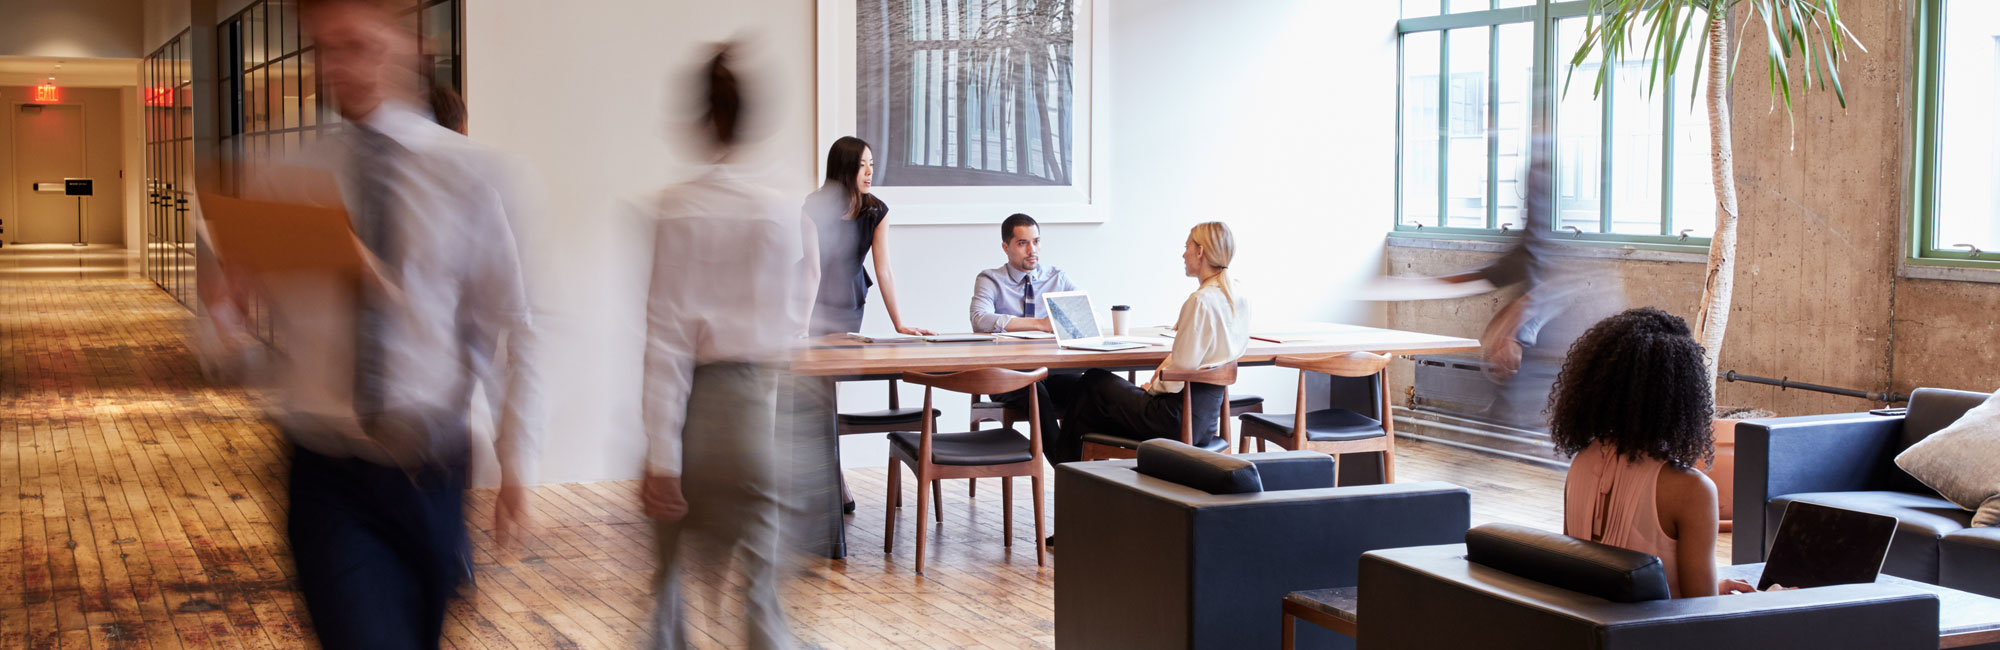 6 Signs You’ve Outgrown your Office Space